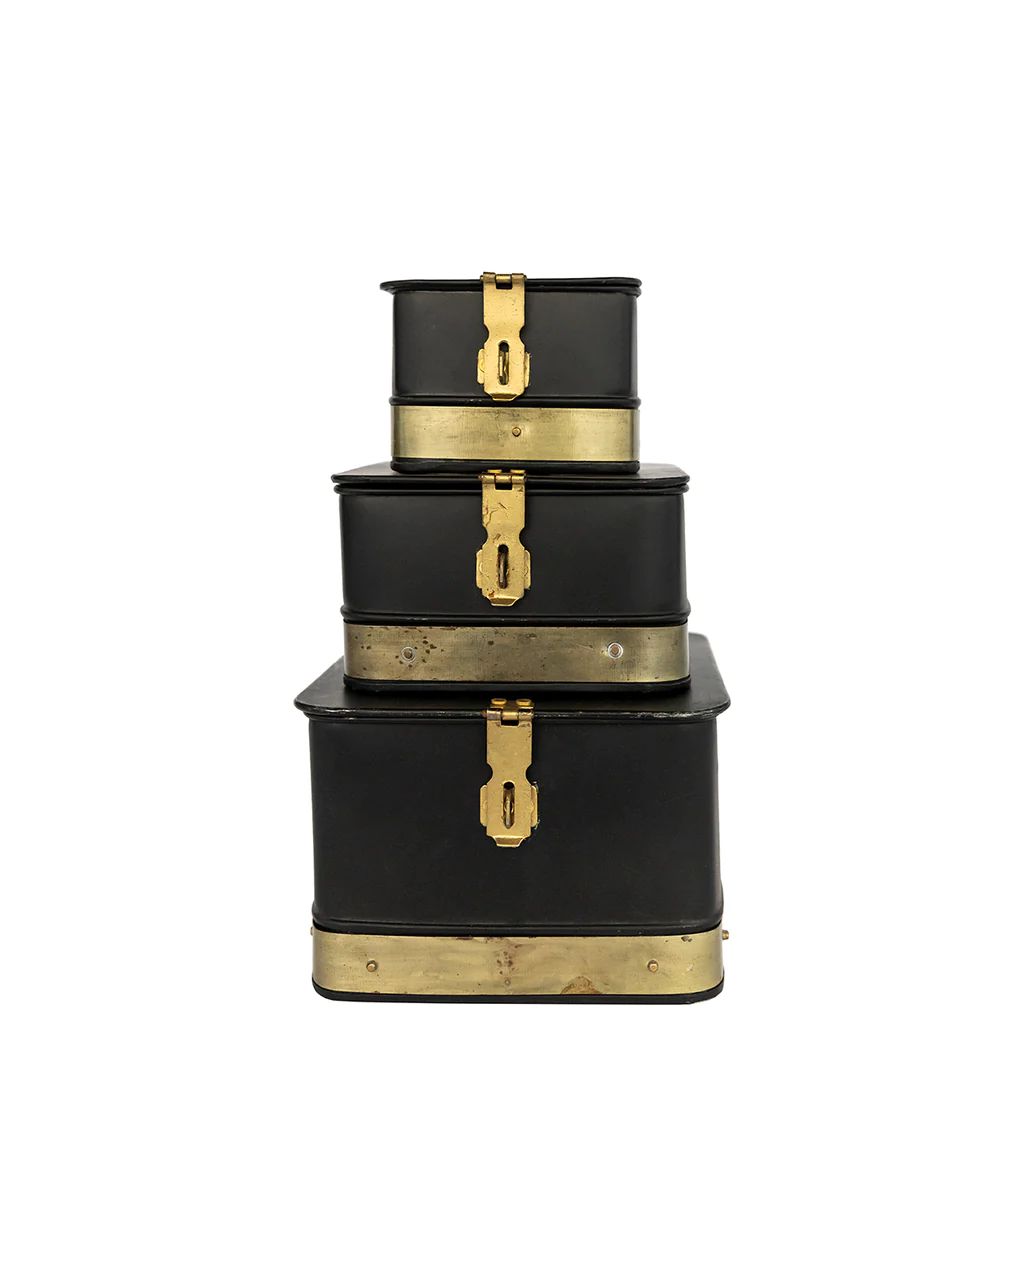 Black & Brass Galvanized Boxes (Set of 3) | McGee & Co.